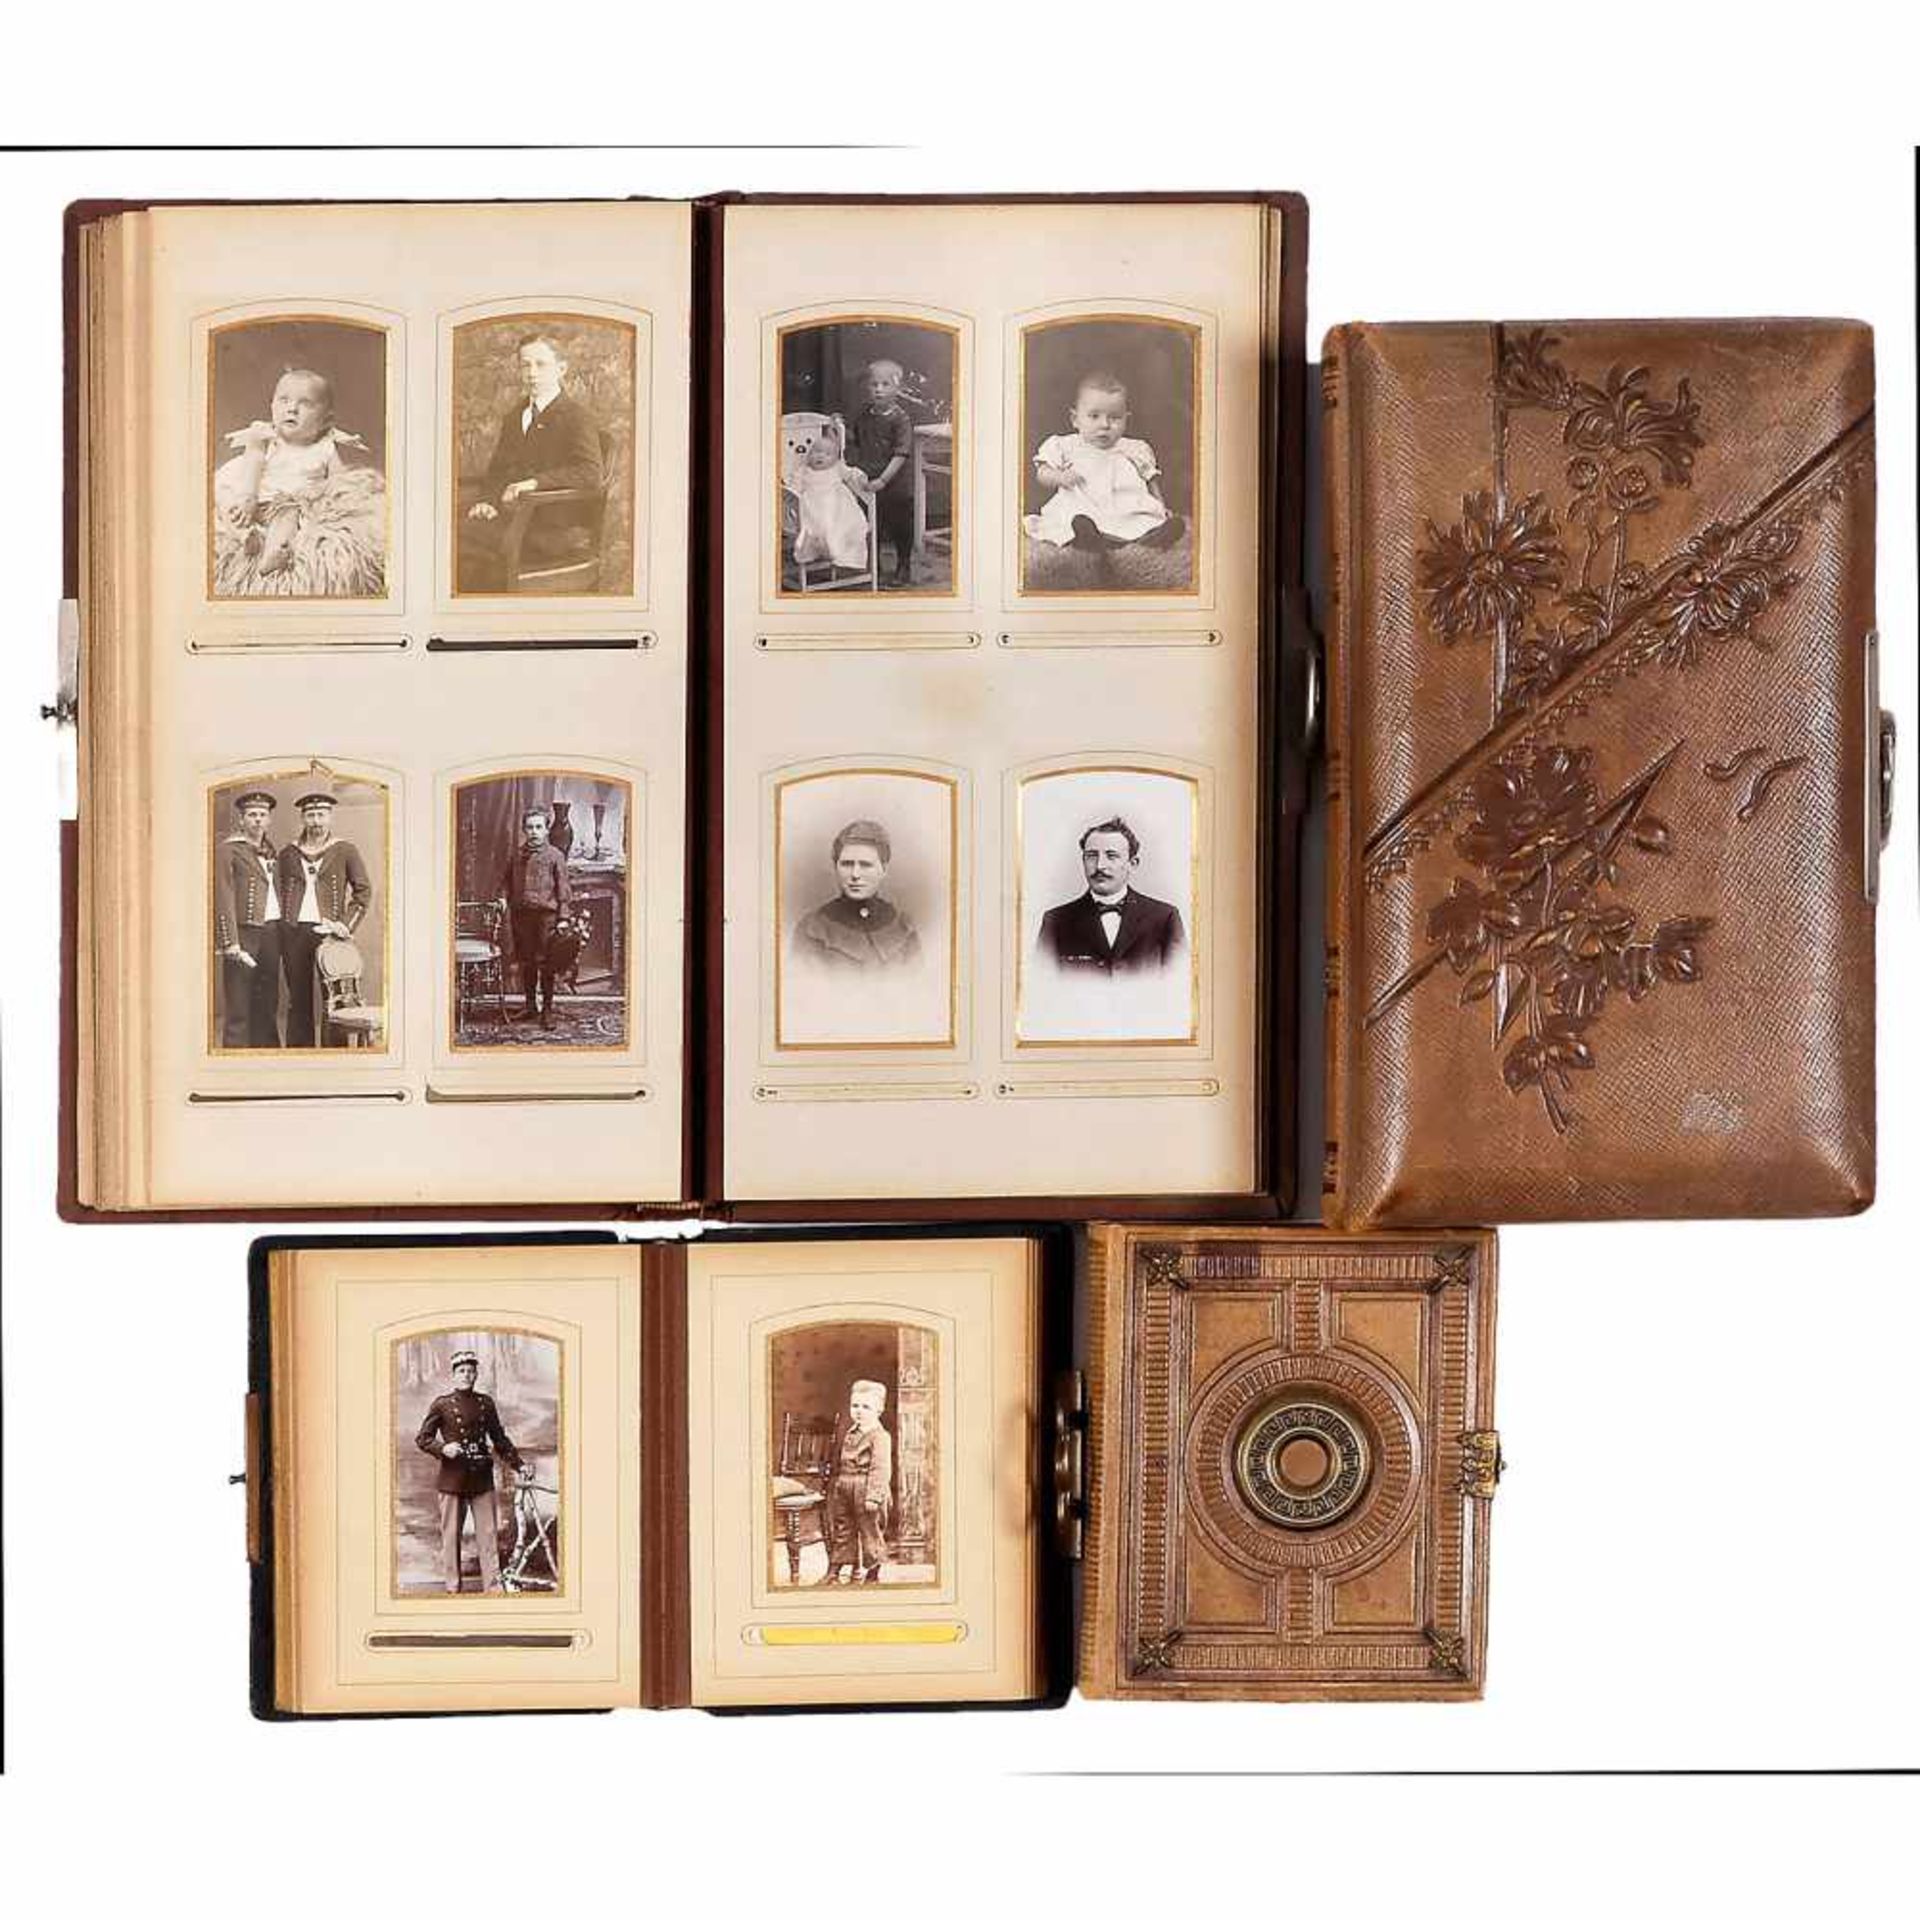 4 Leather-Bound Photographic Albums, late 19th CenturyWith decorative mounts, embossed covers,